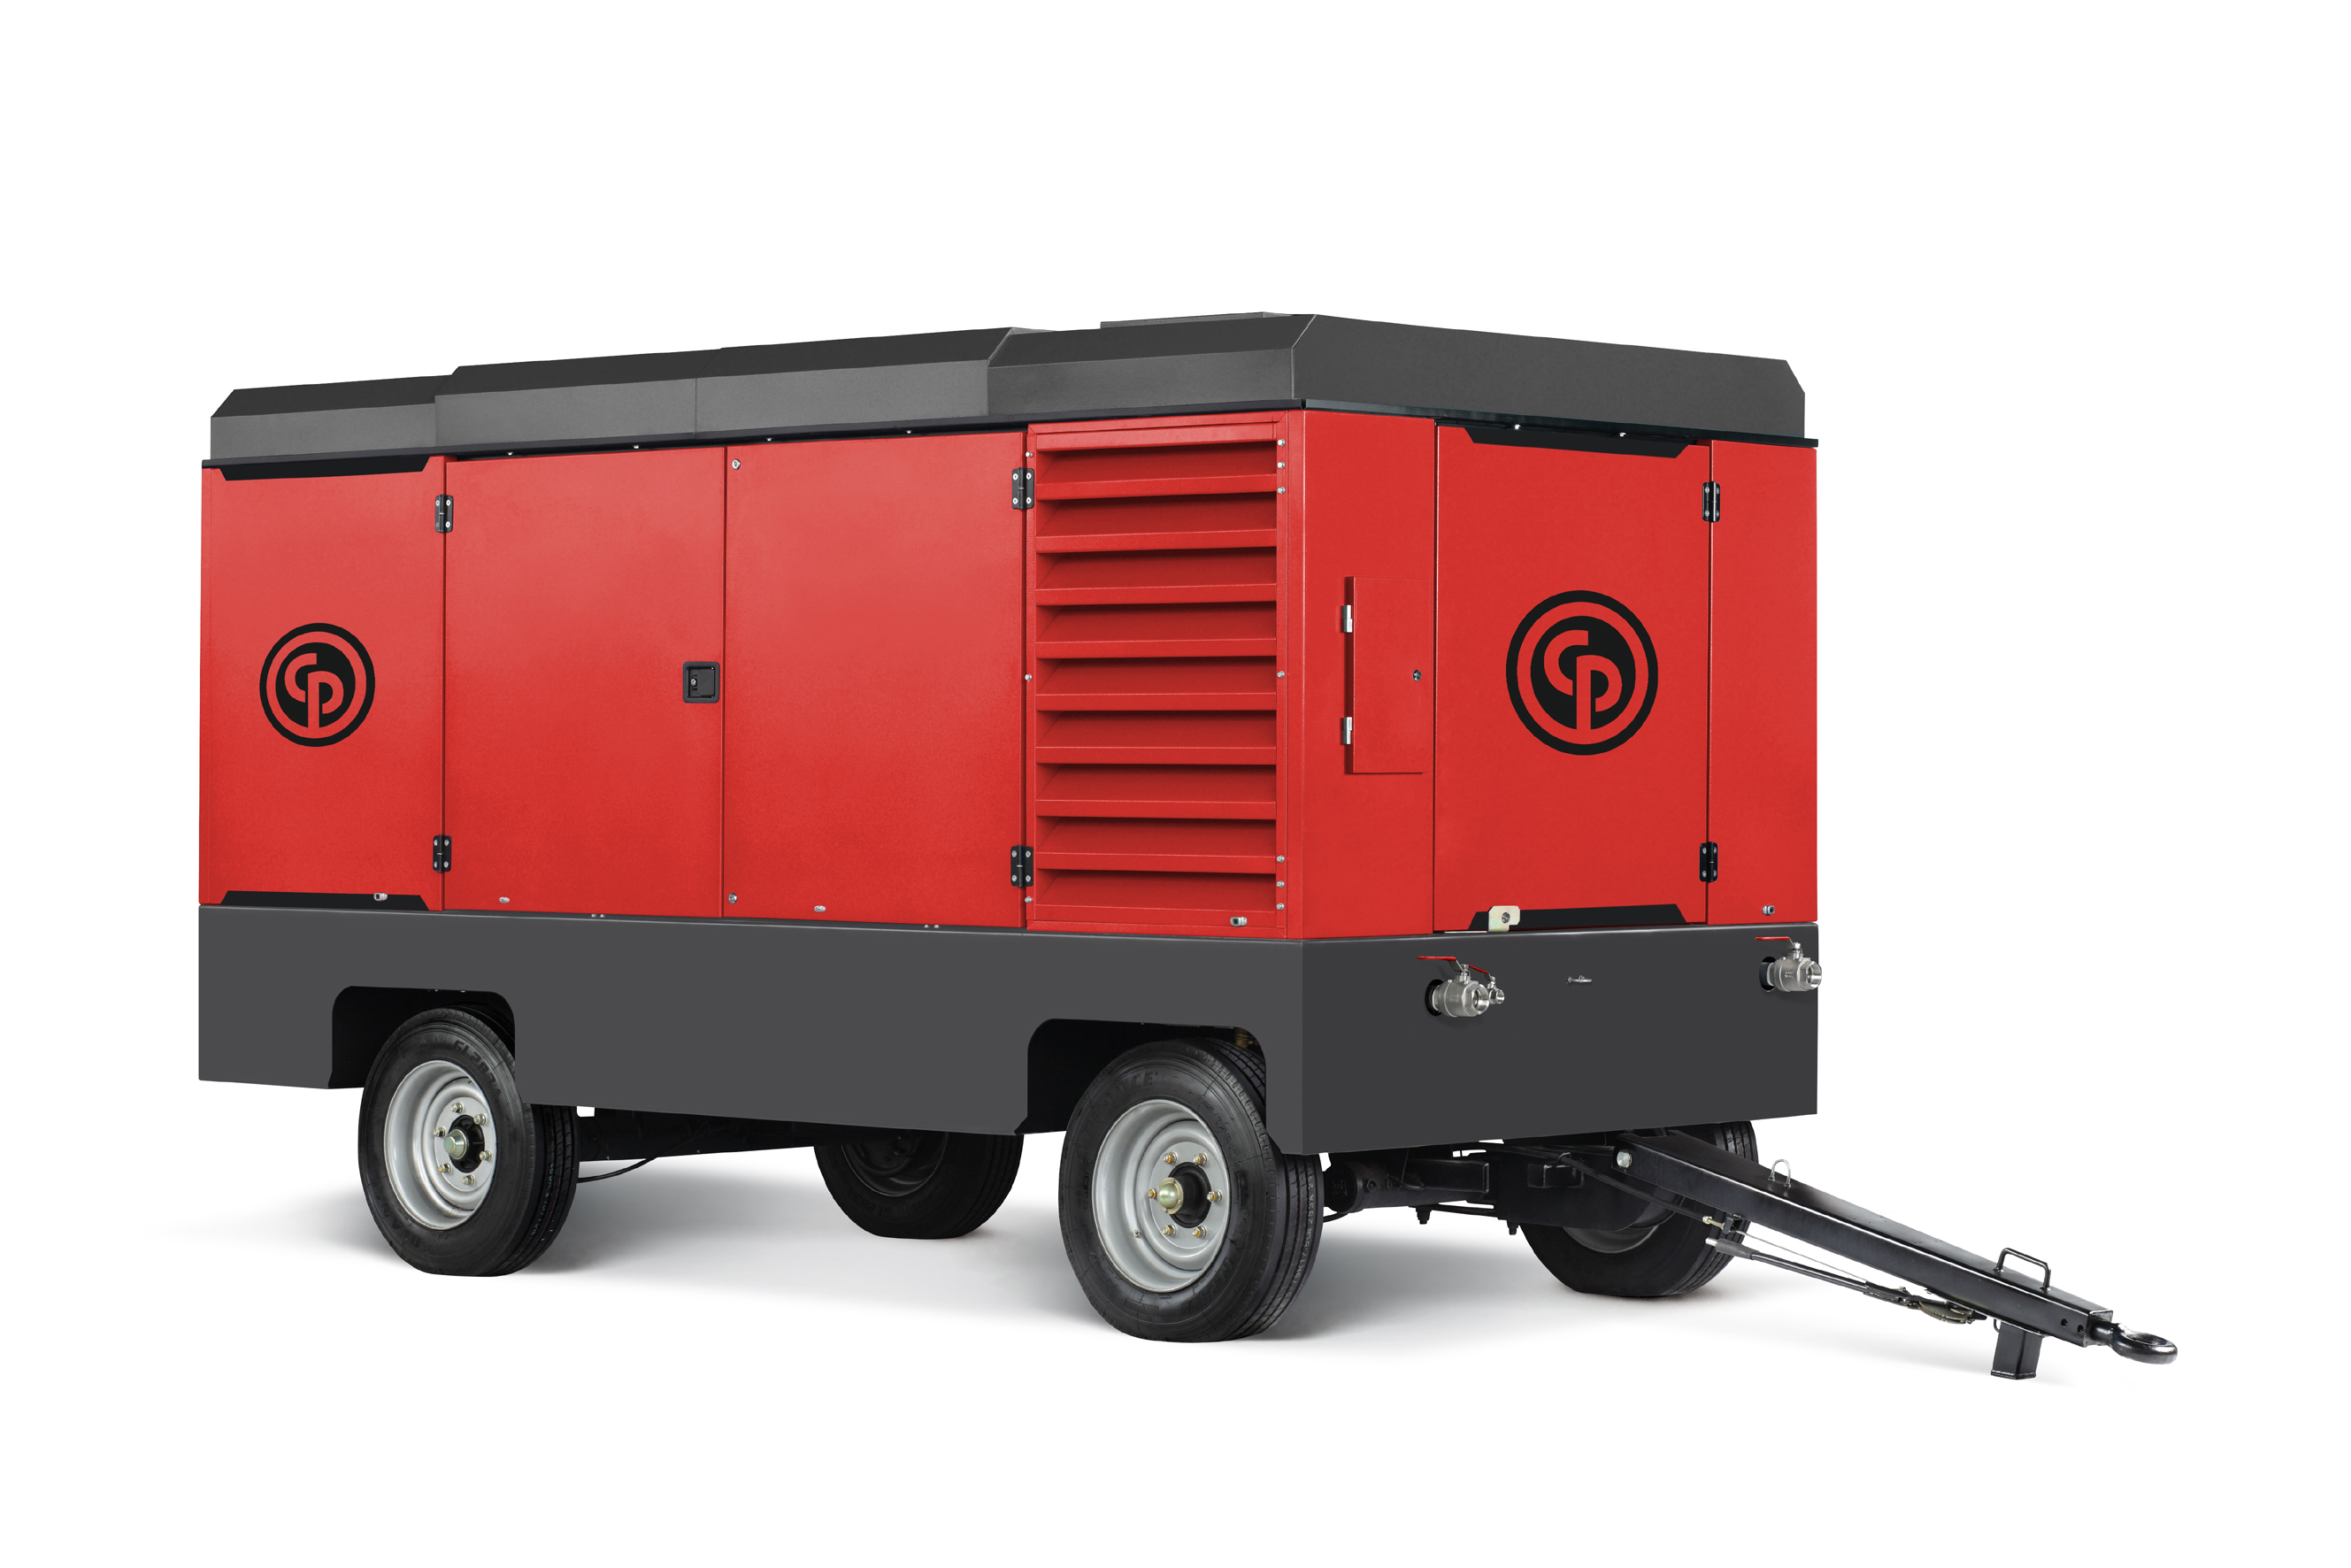 Chicago Pneumatic CPS 950-10 portable compressors